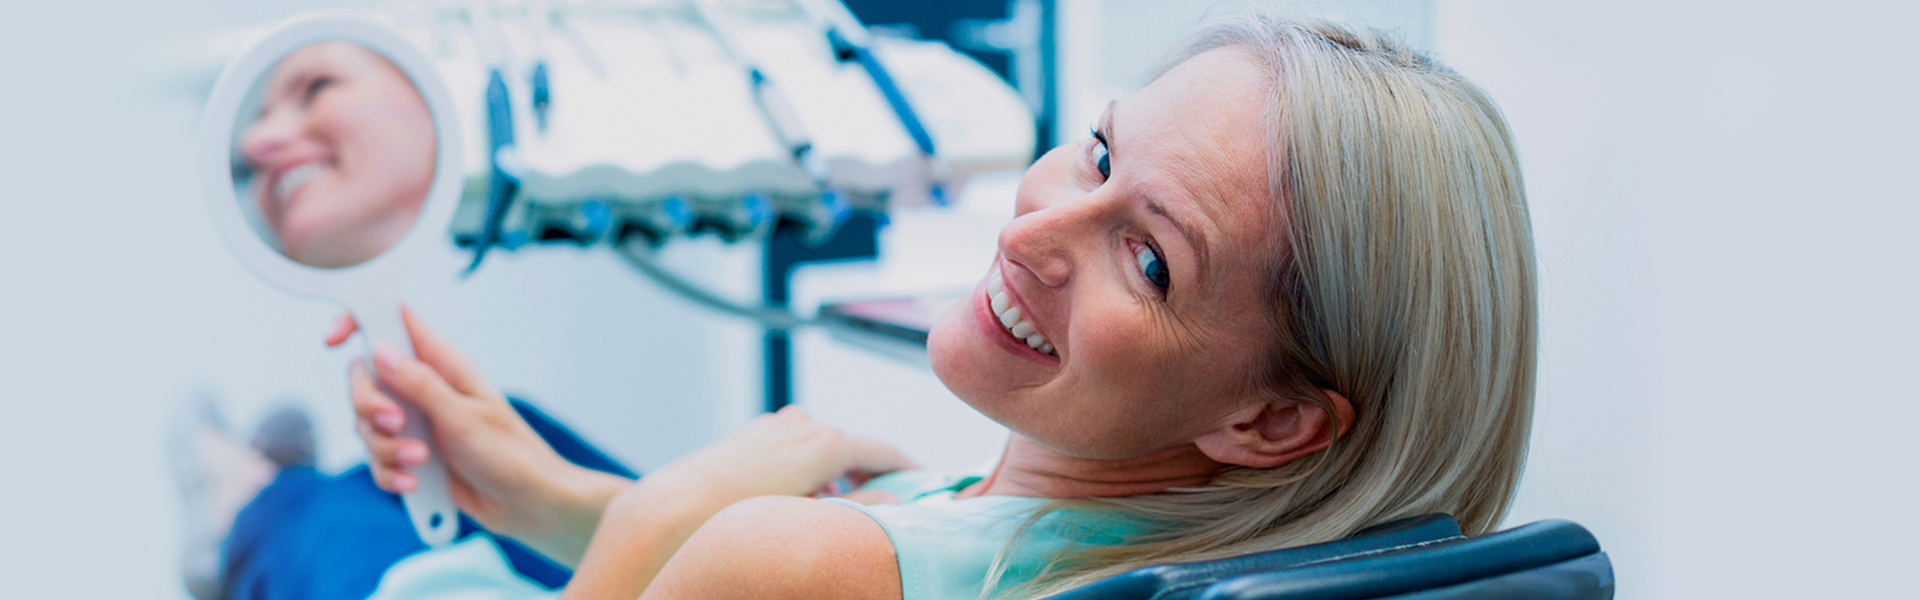 How to Manage Your Pain during a Root Canal Procedure